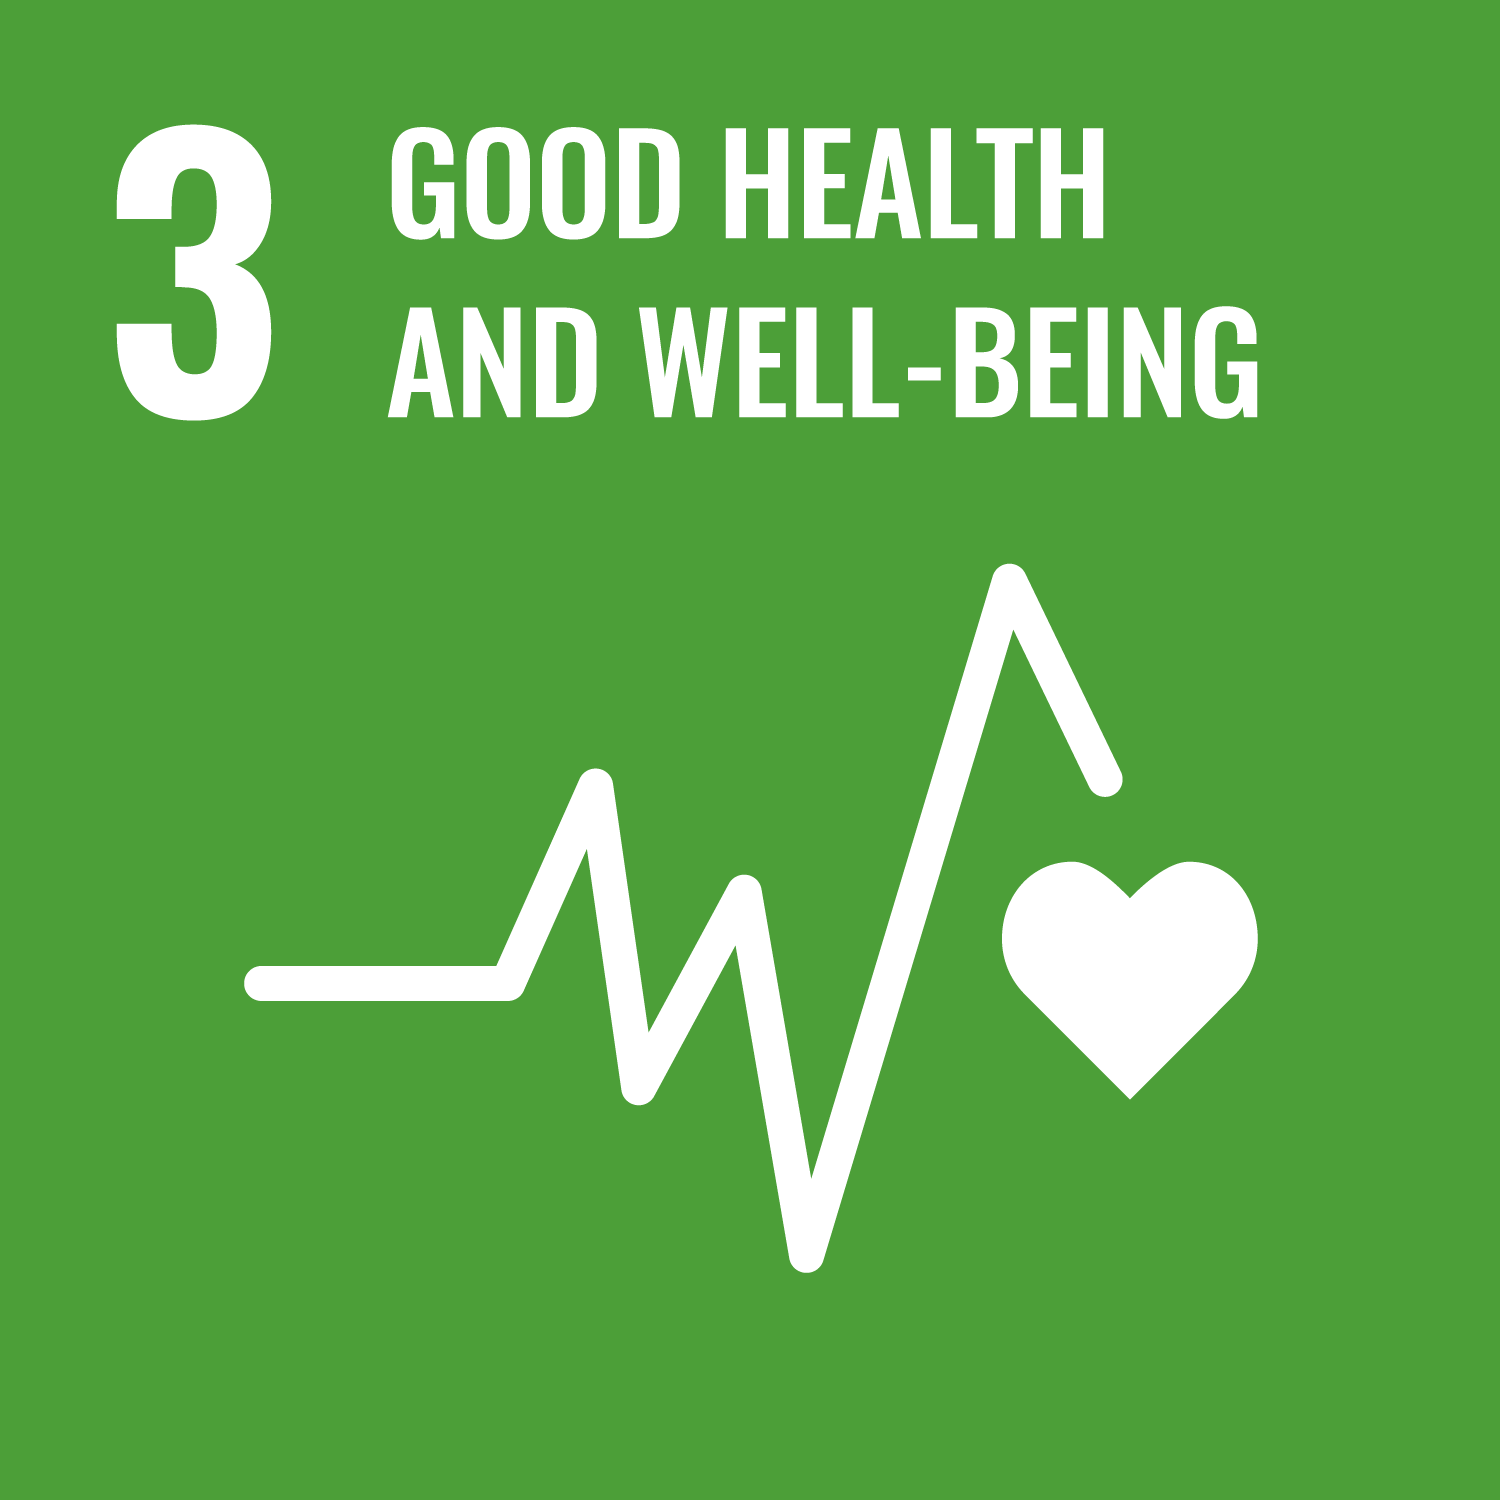 Good Health and well-being / Salud